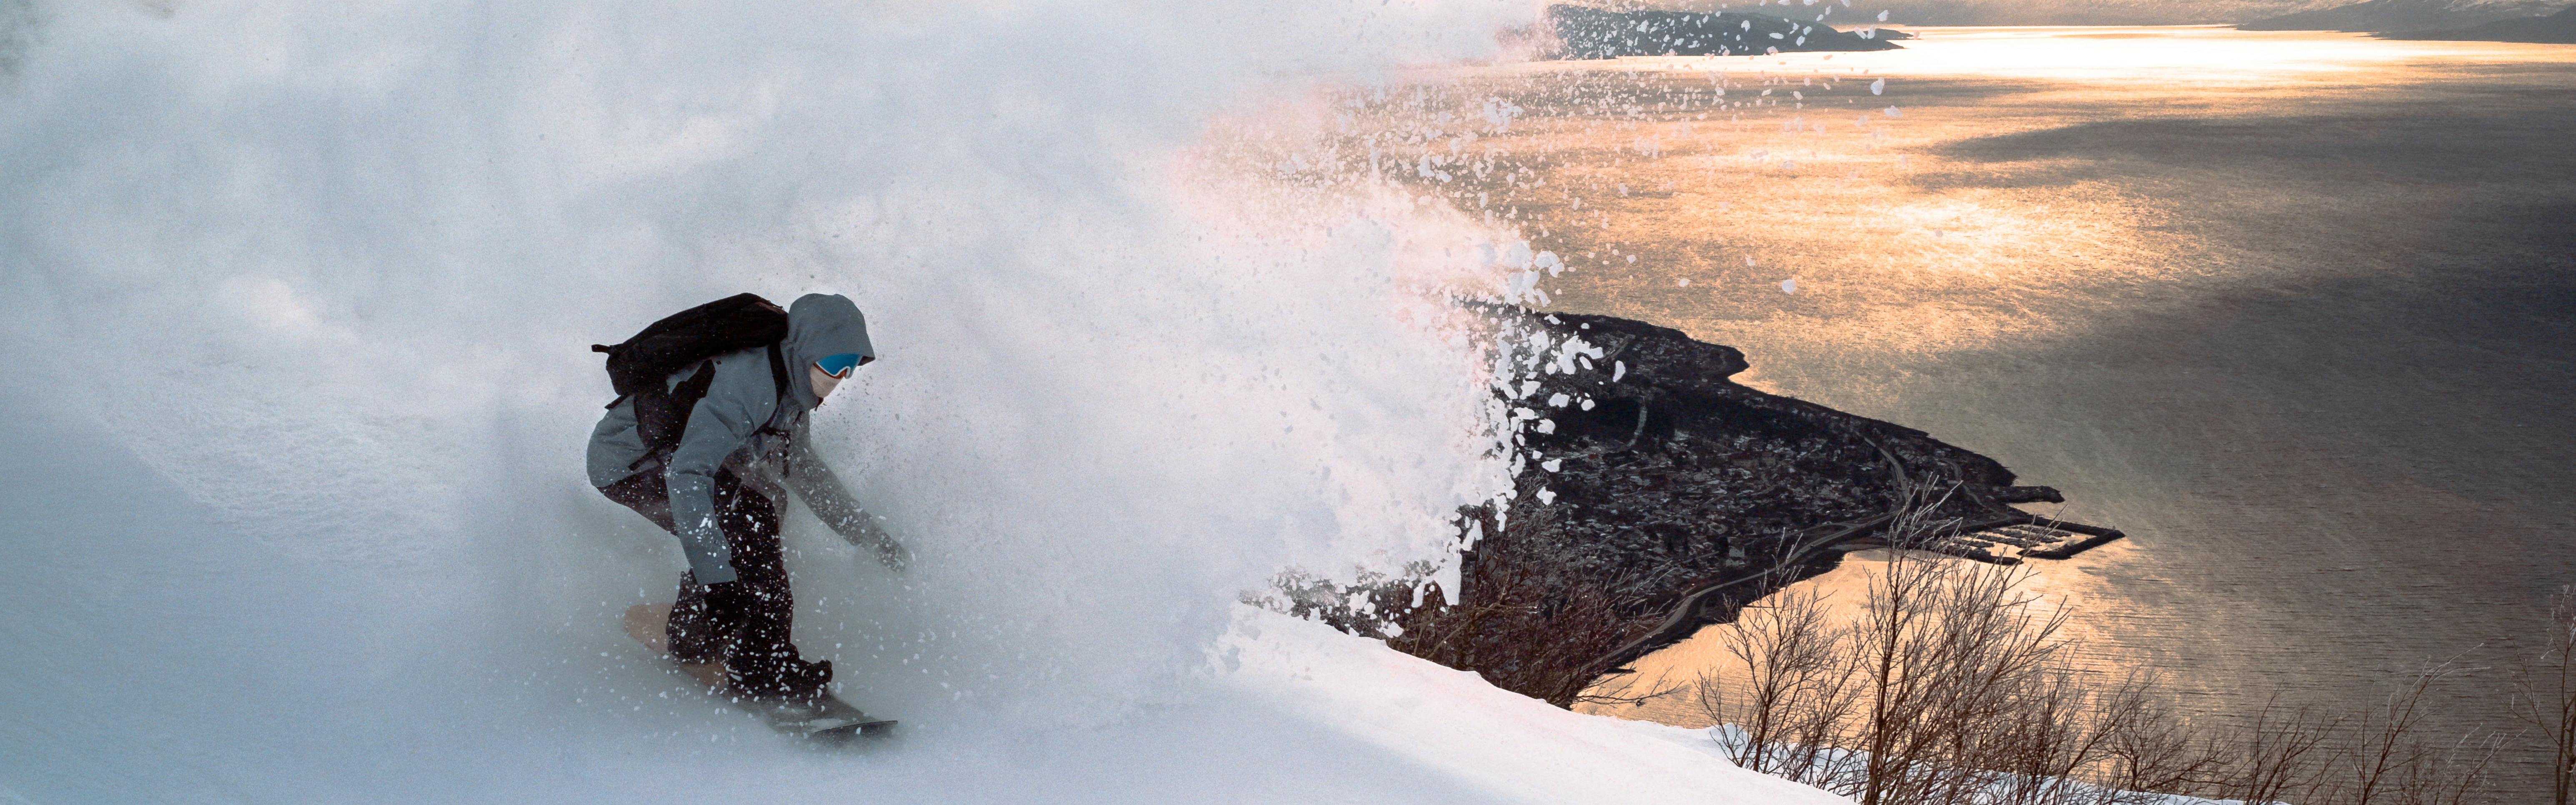 A snowboarder rides down a hill, sending off a big plume of powder behind them. In the distance, a large body of water reflects warm sunlight. 